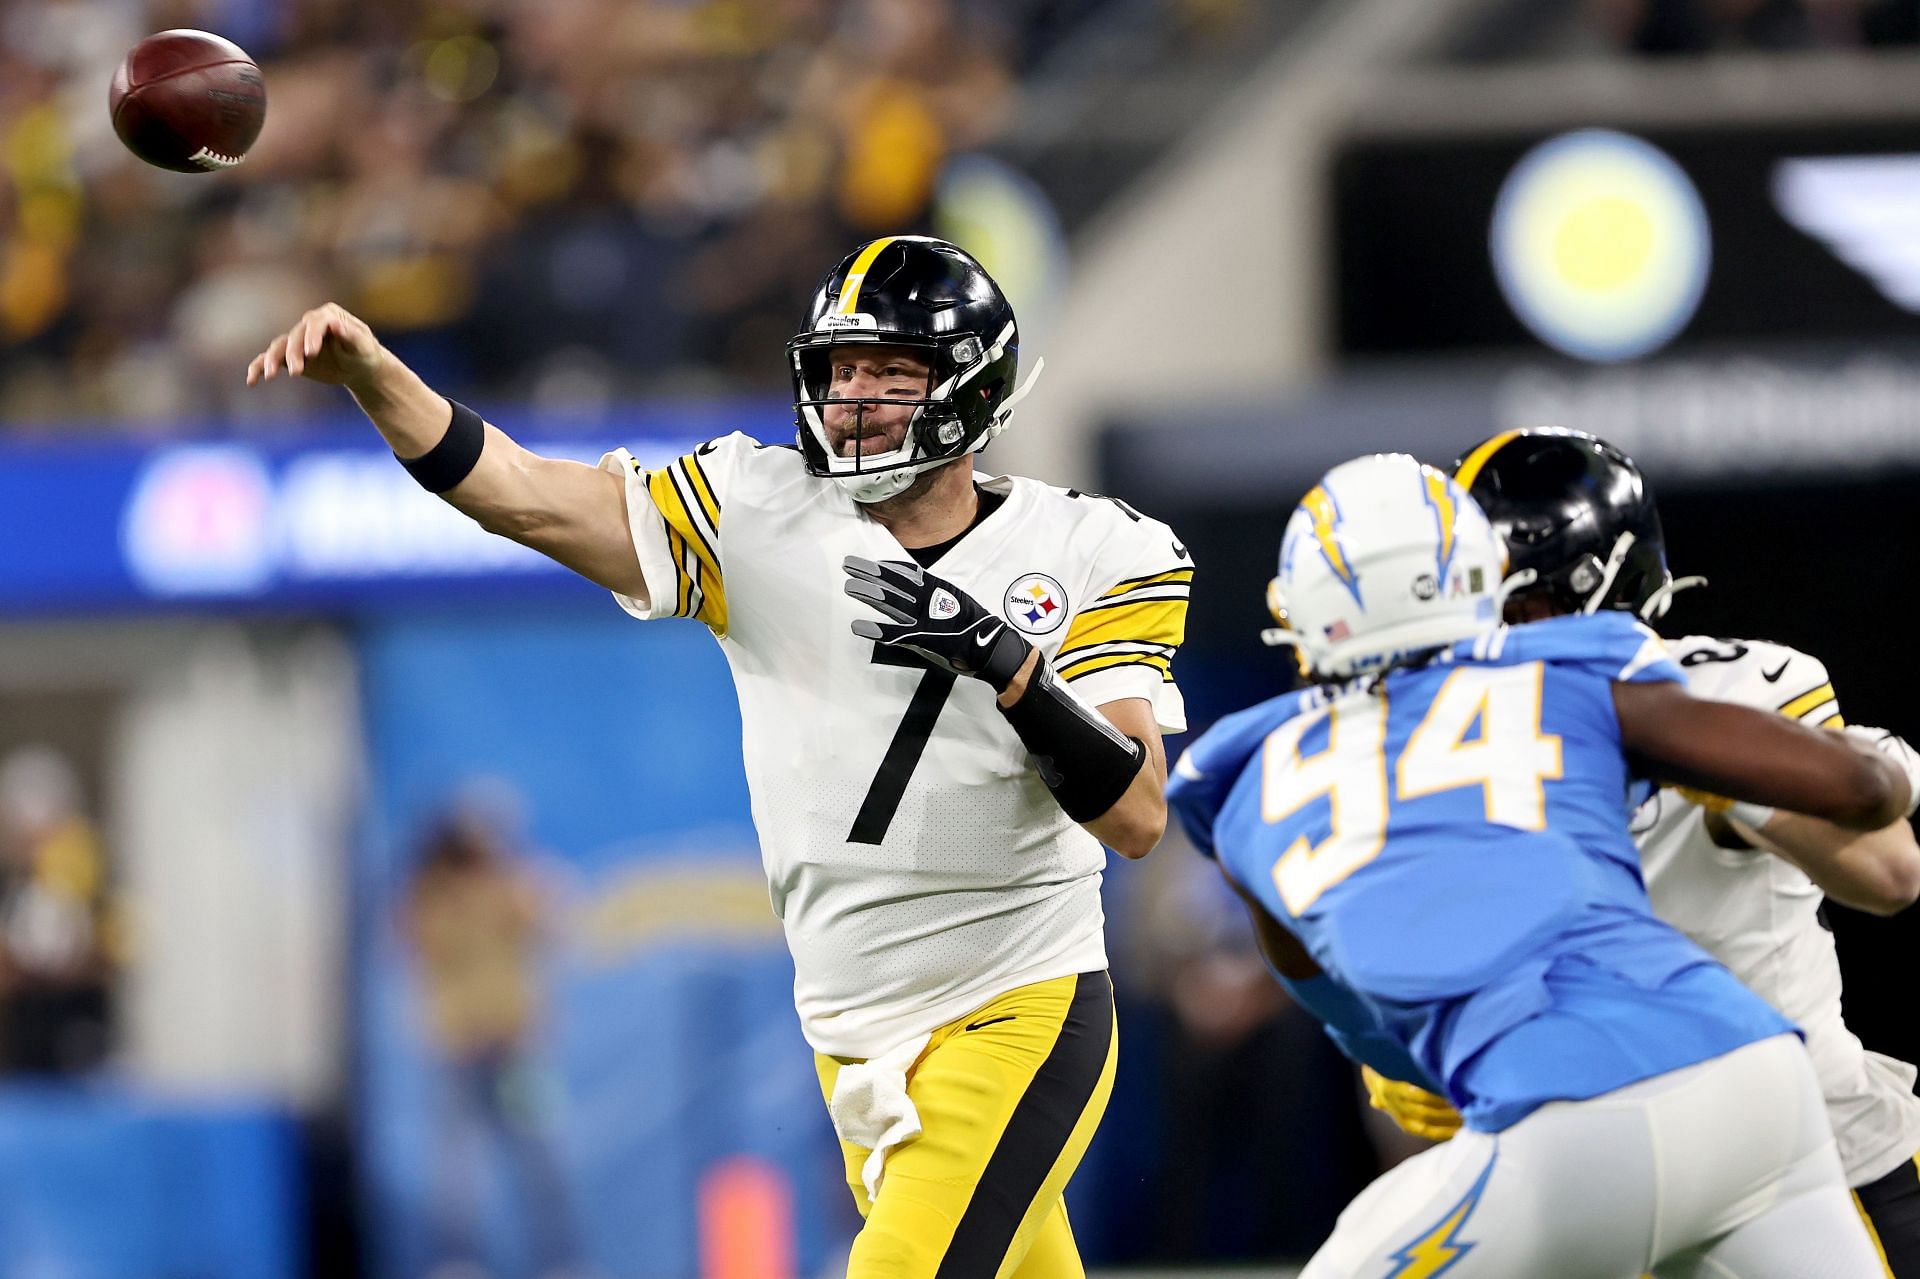 Pittsburgh Steelers QB Ben Roethlisberger v Los Angeles Chargers